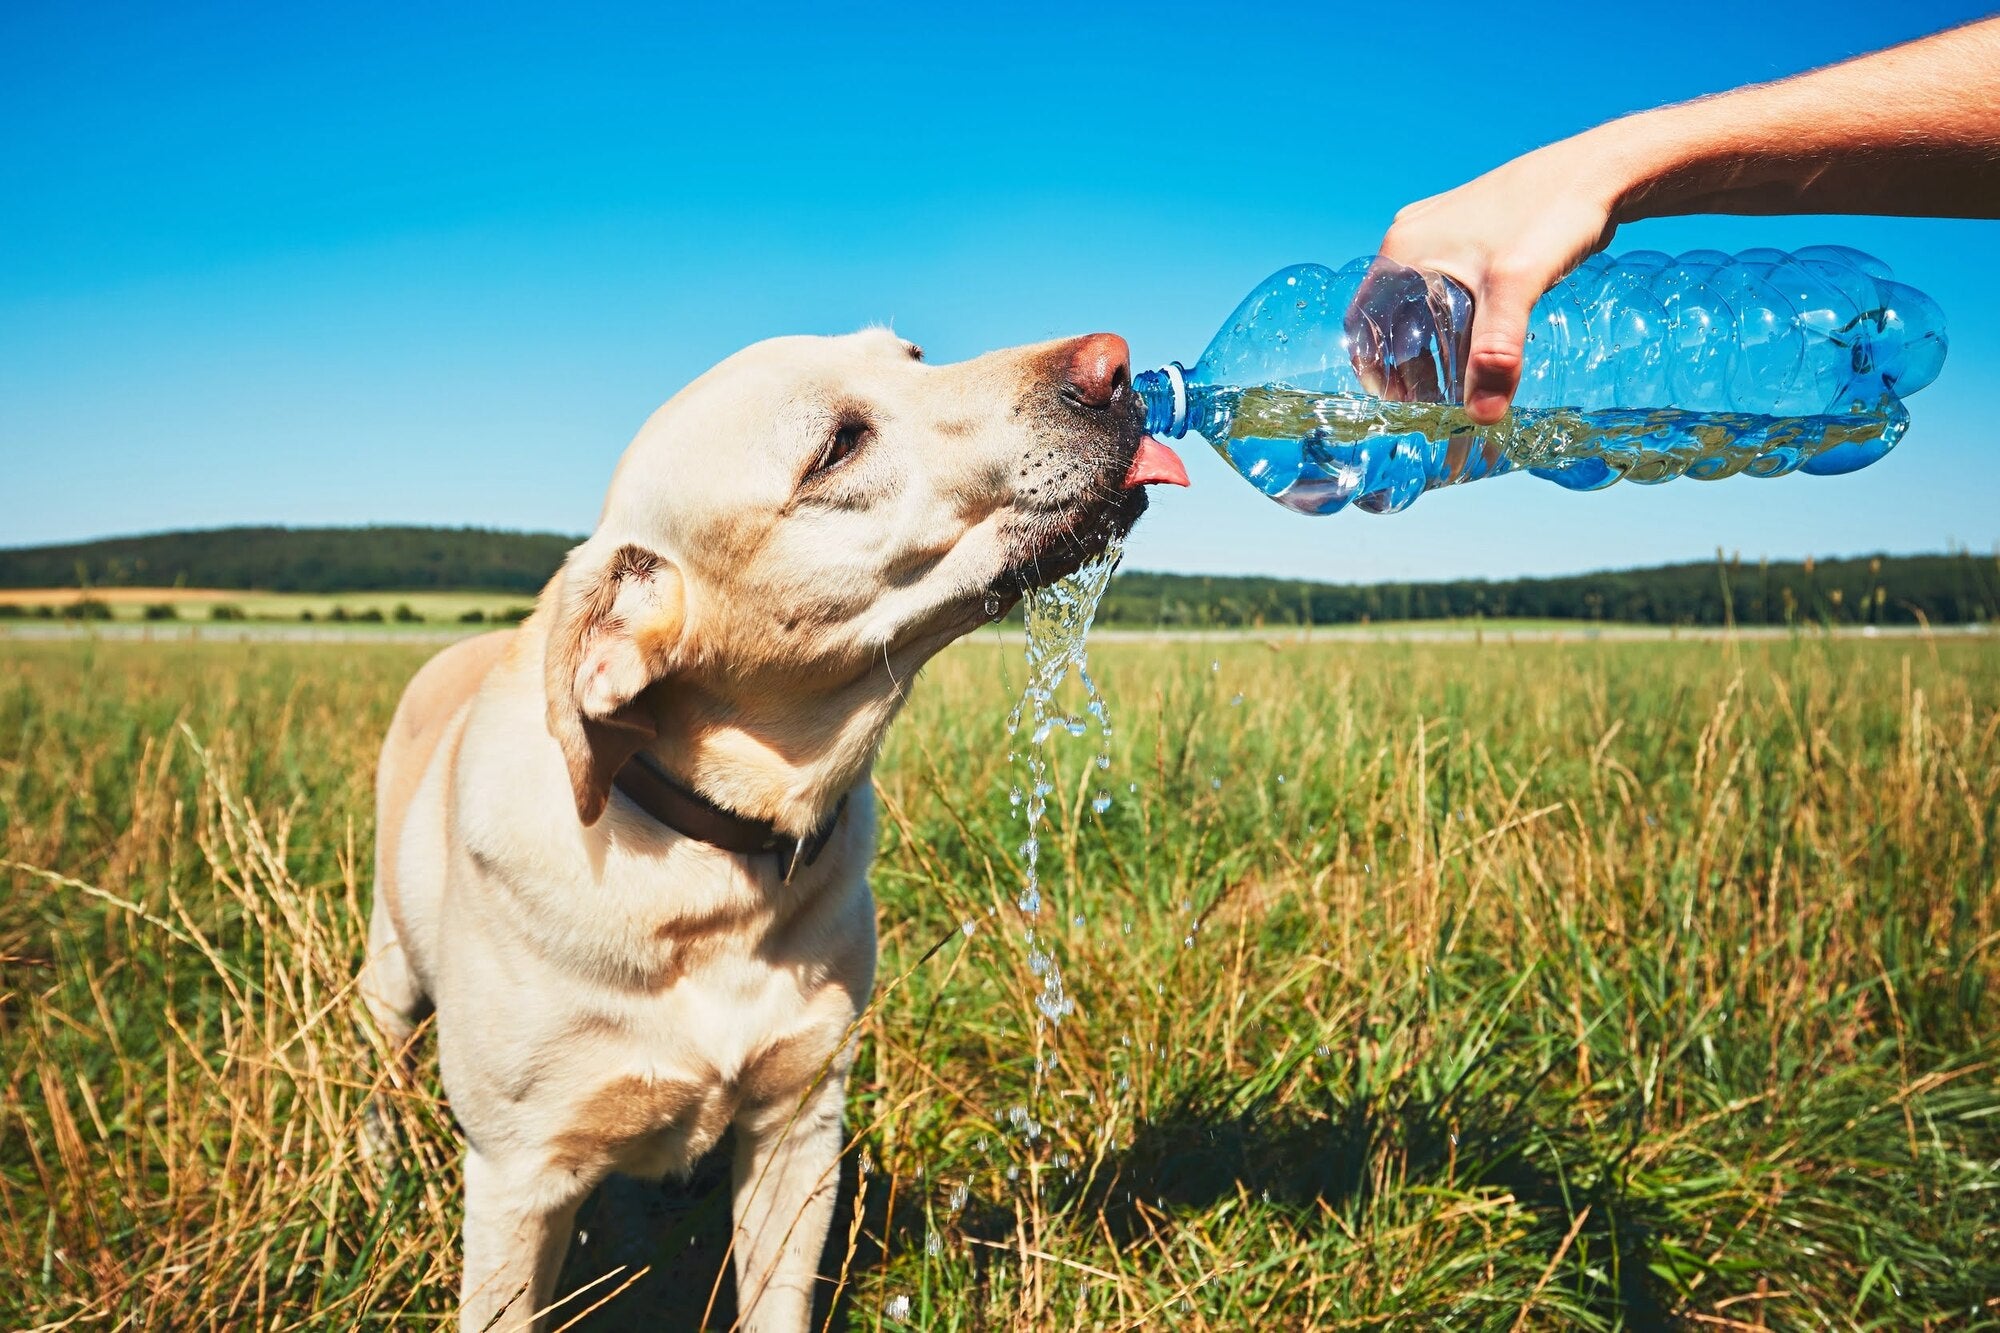 Gold retriever drinking water out of a water bottle